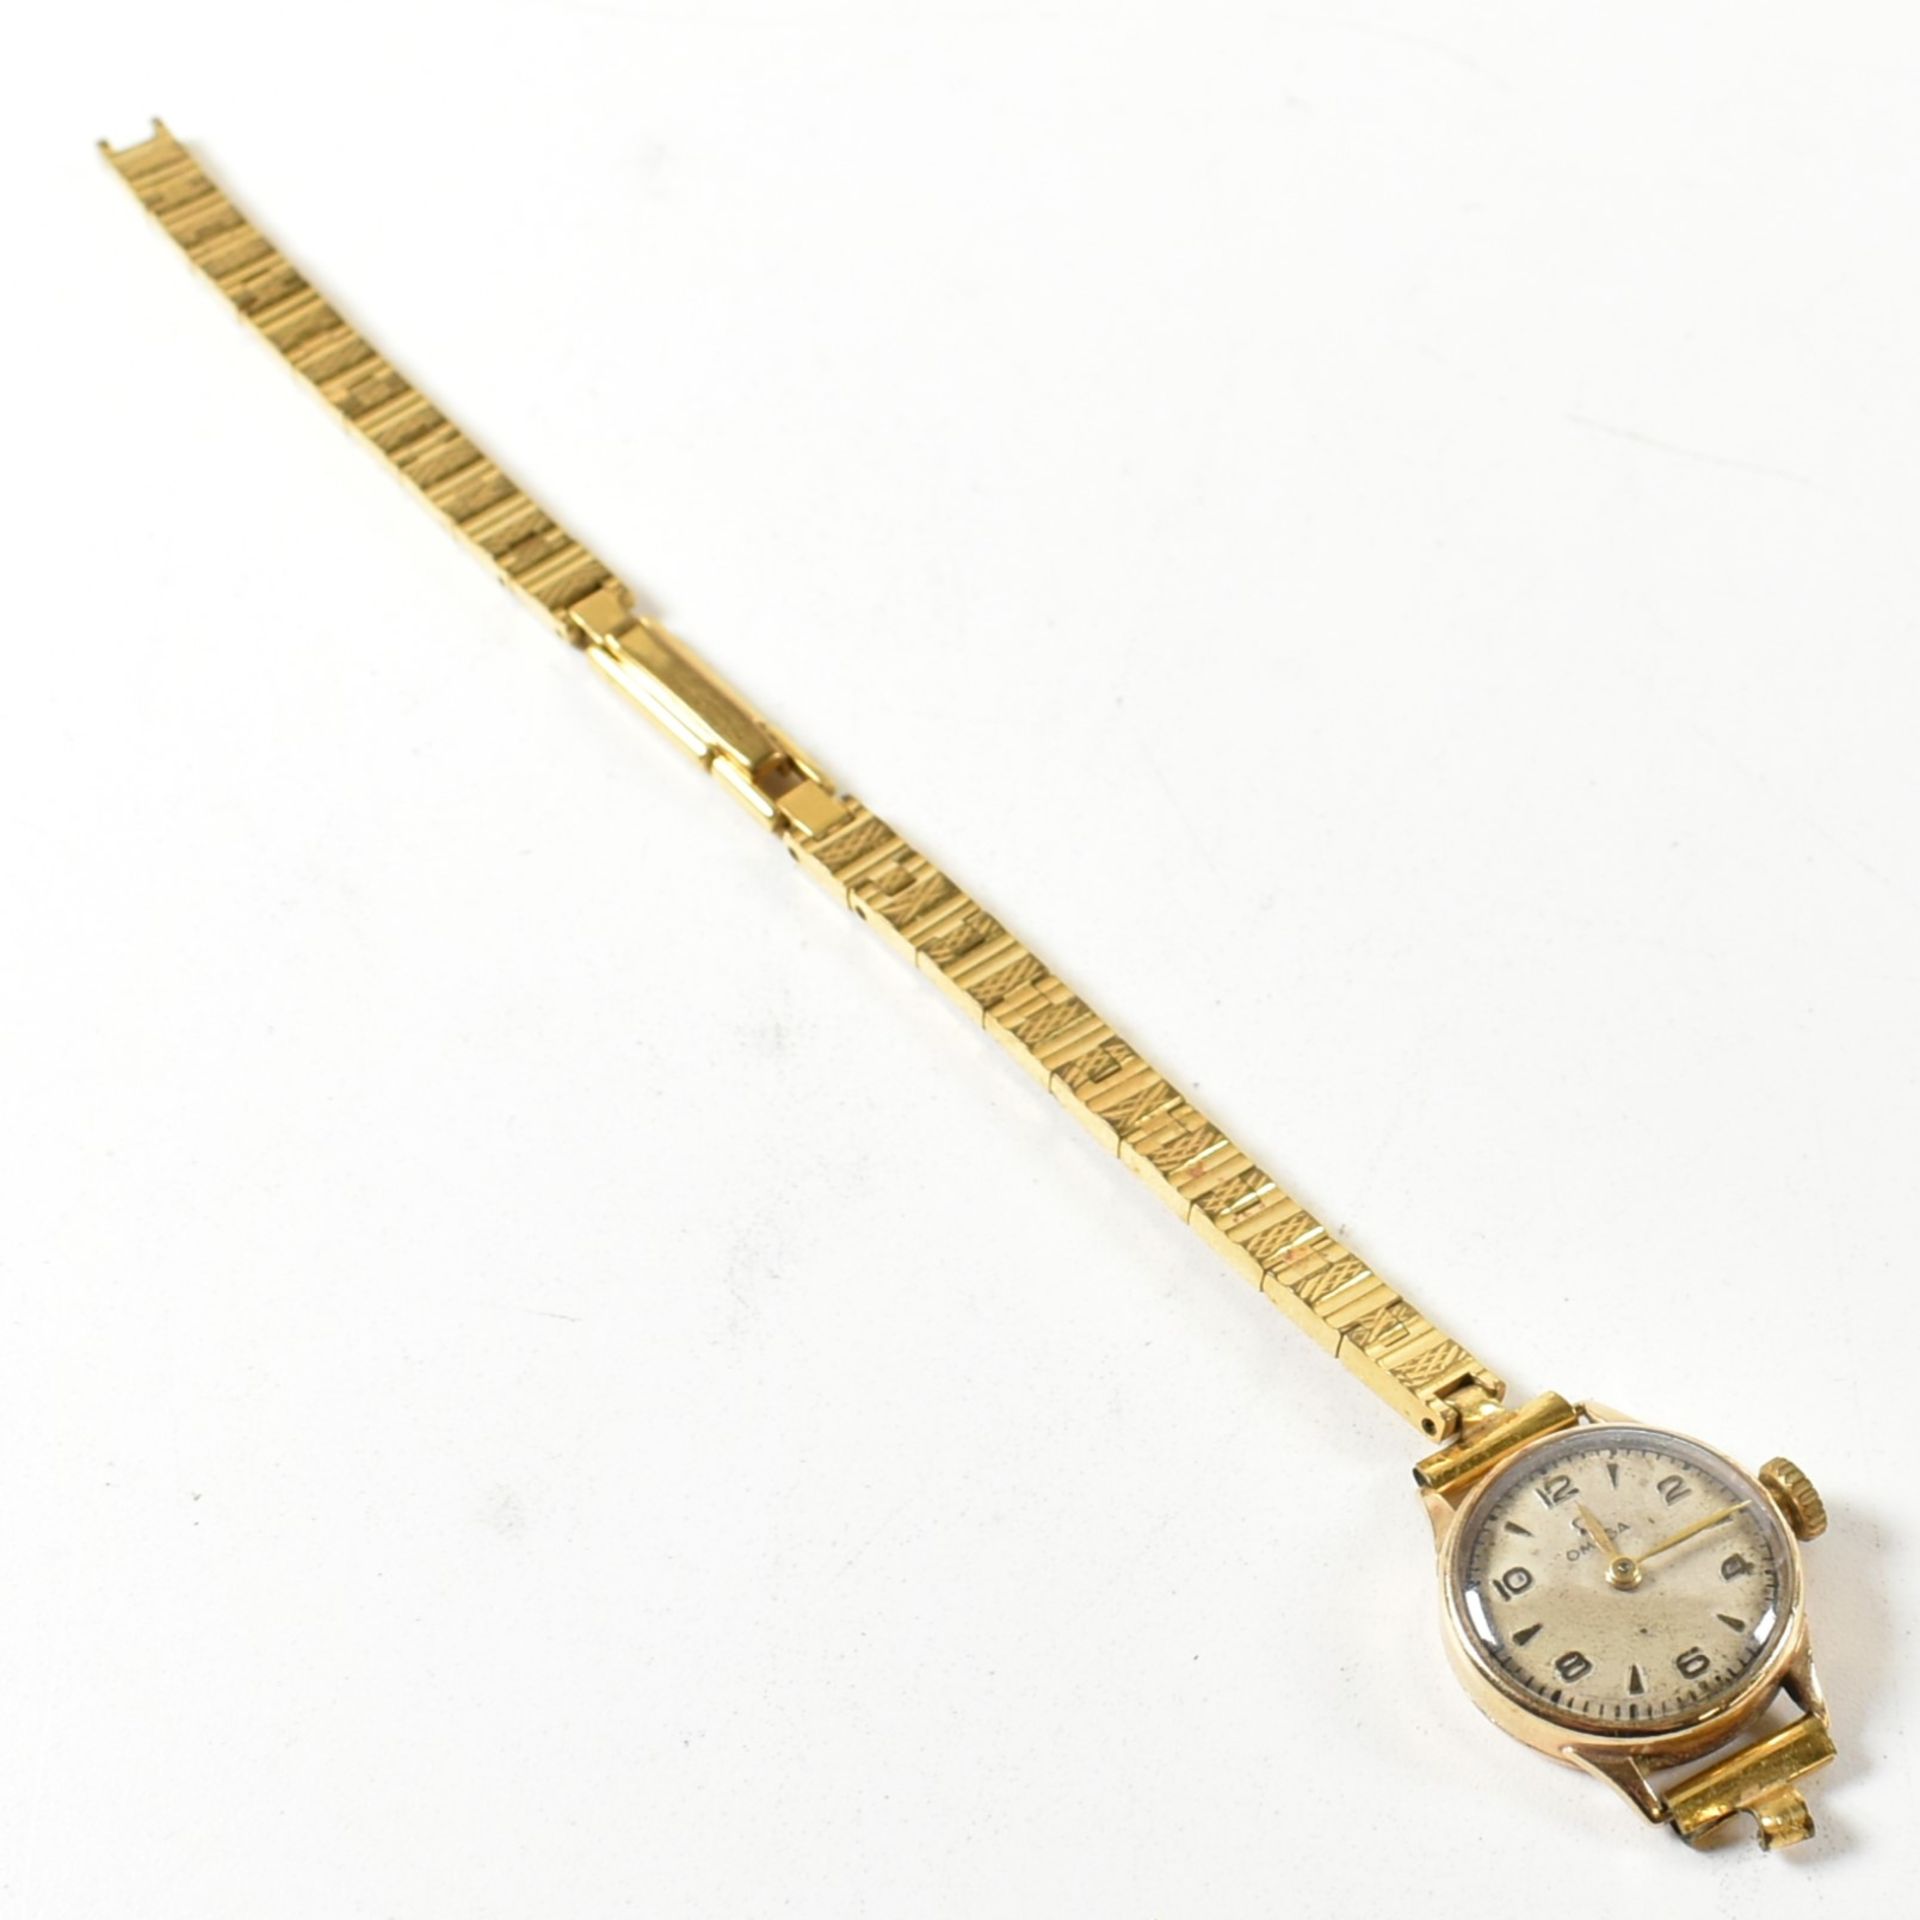 HALLMARKED 9CT GOLD OMEGA WATCH ON GILDED STRAP - Image 5 of 5